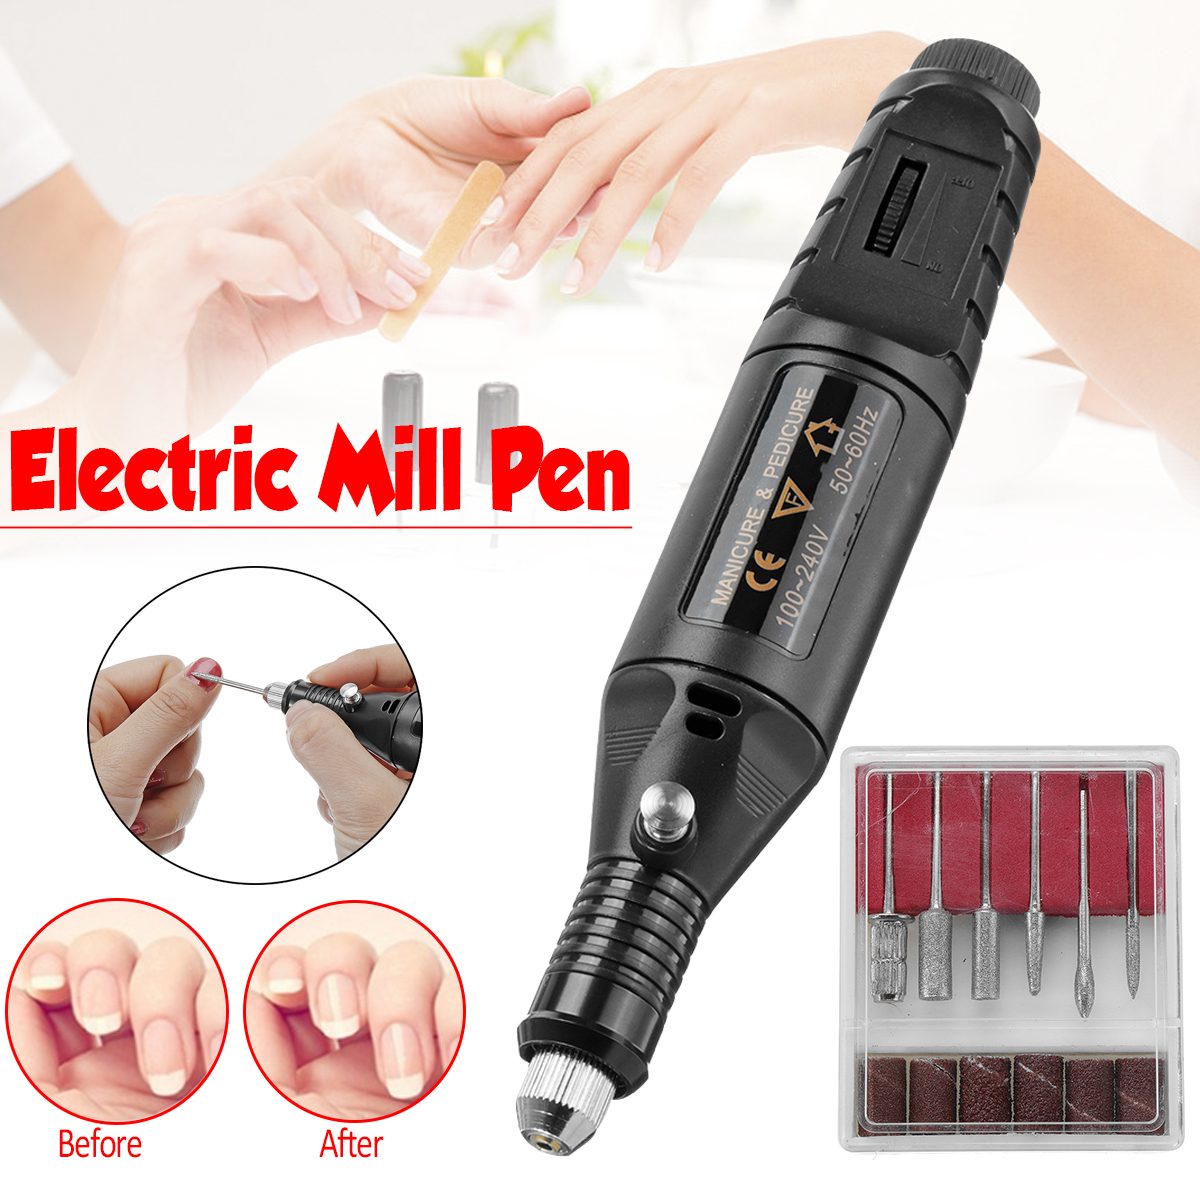 Mini-Electric-Grinder-USB-Engraving-Pen-Grinding-Milling-Rotary-Drill-Trimming-Polishing-Drilling-Cu-1419457-3